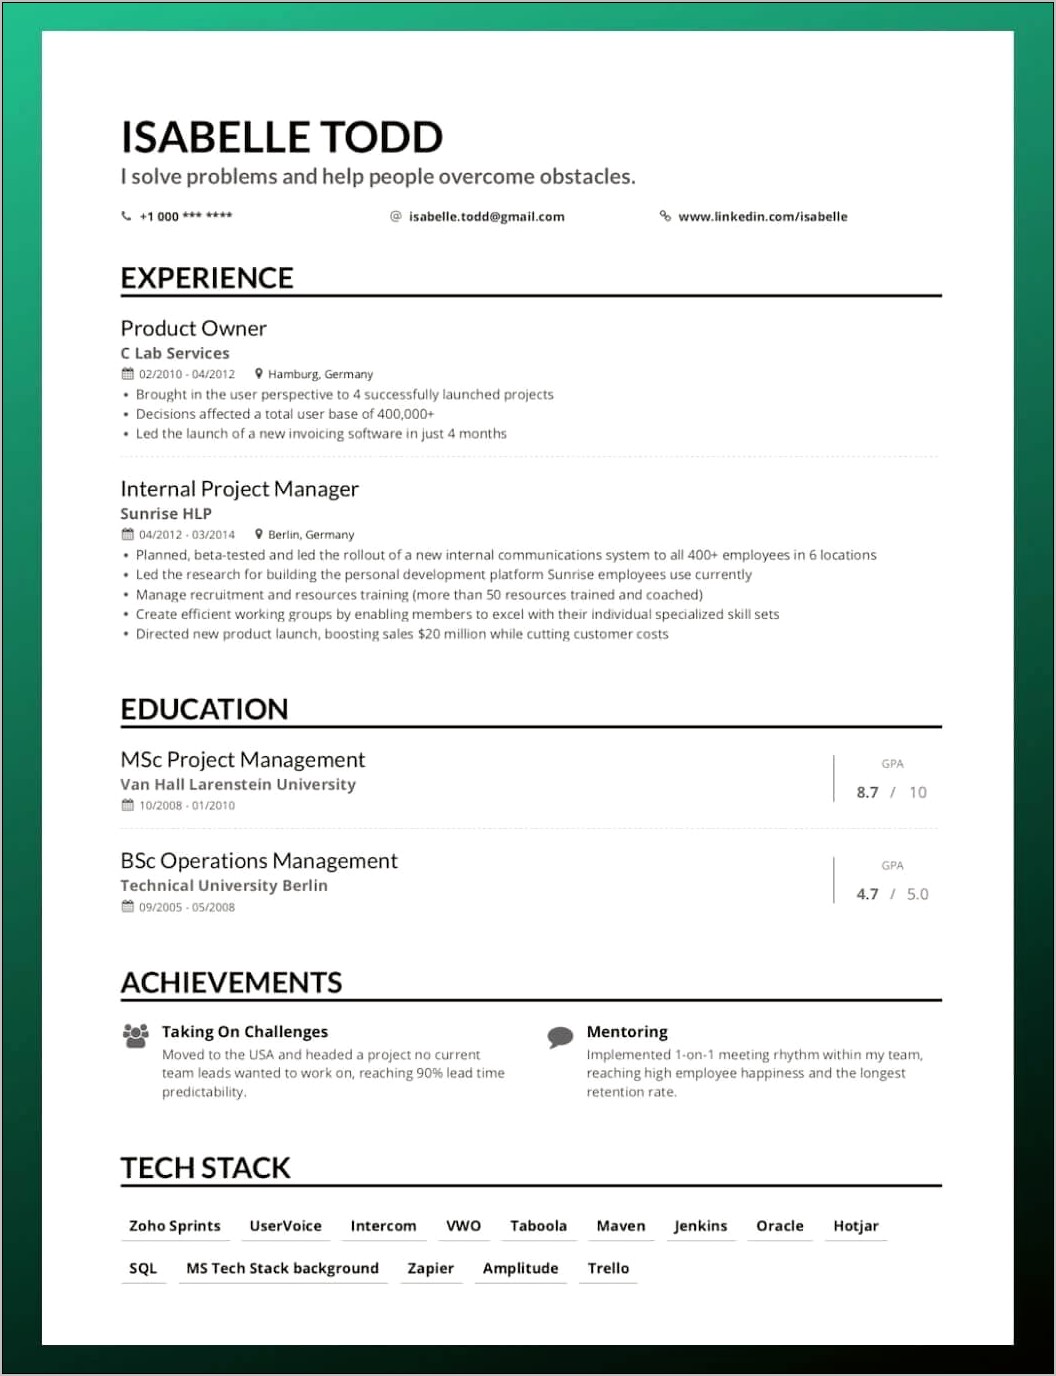 Most Recent Or Relevant Experience First On Resume